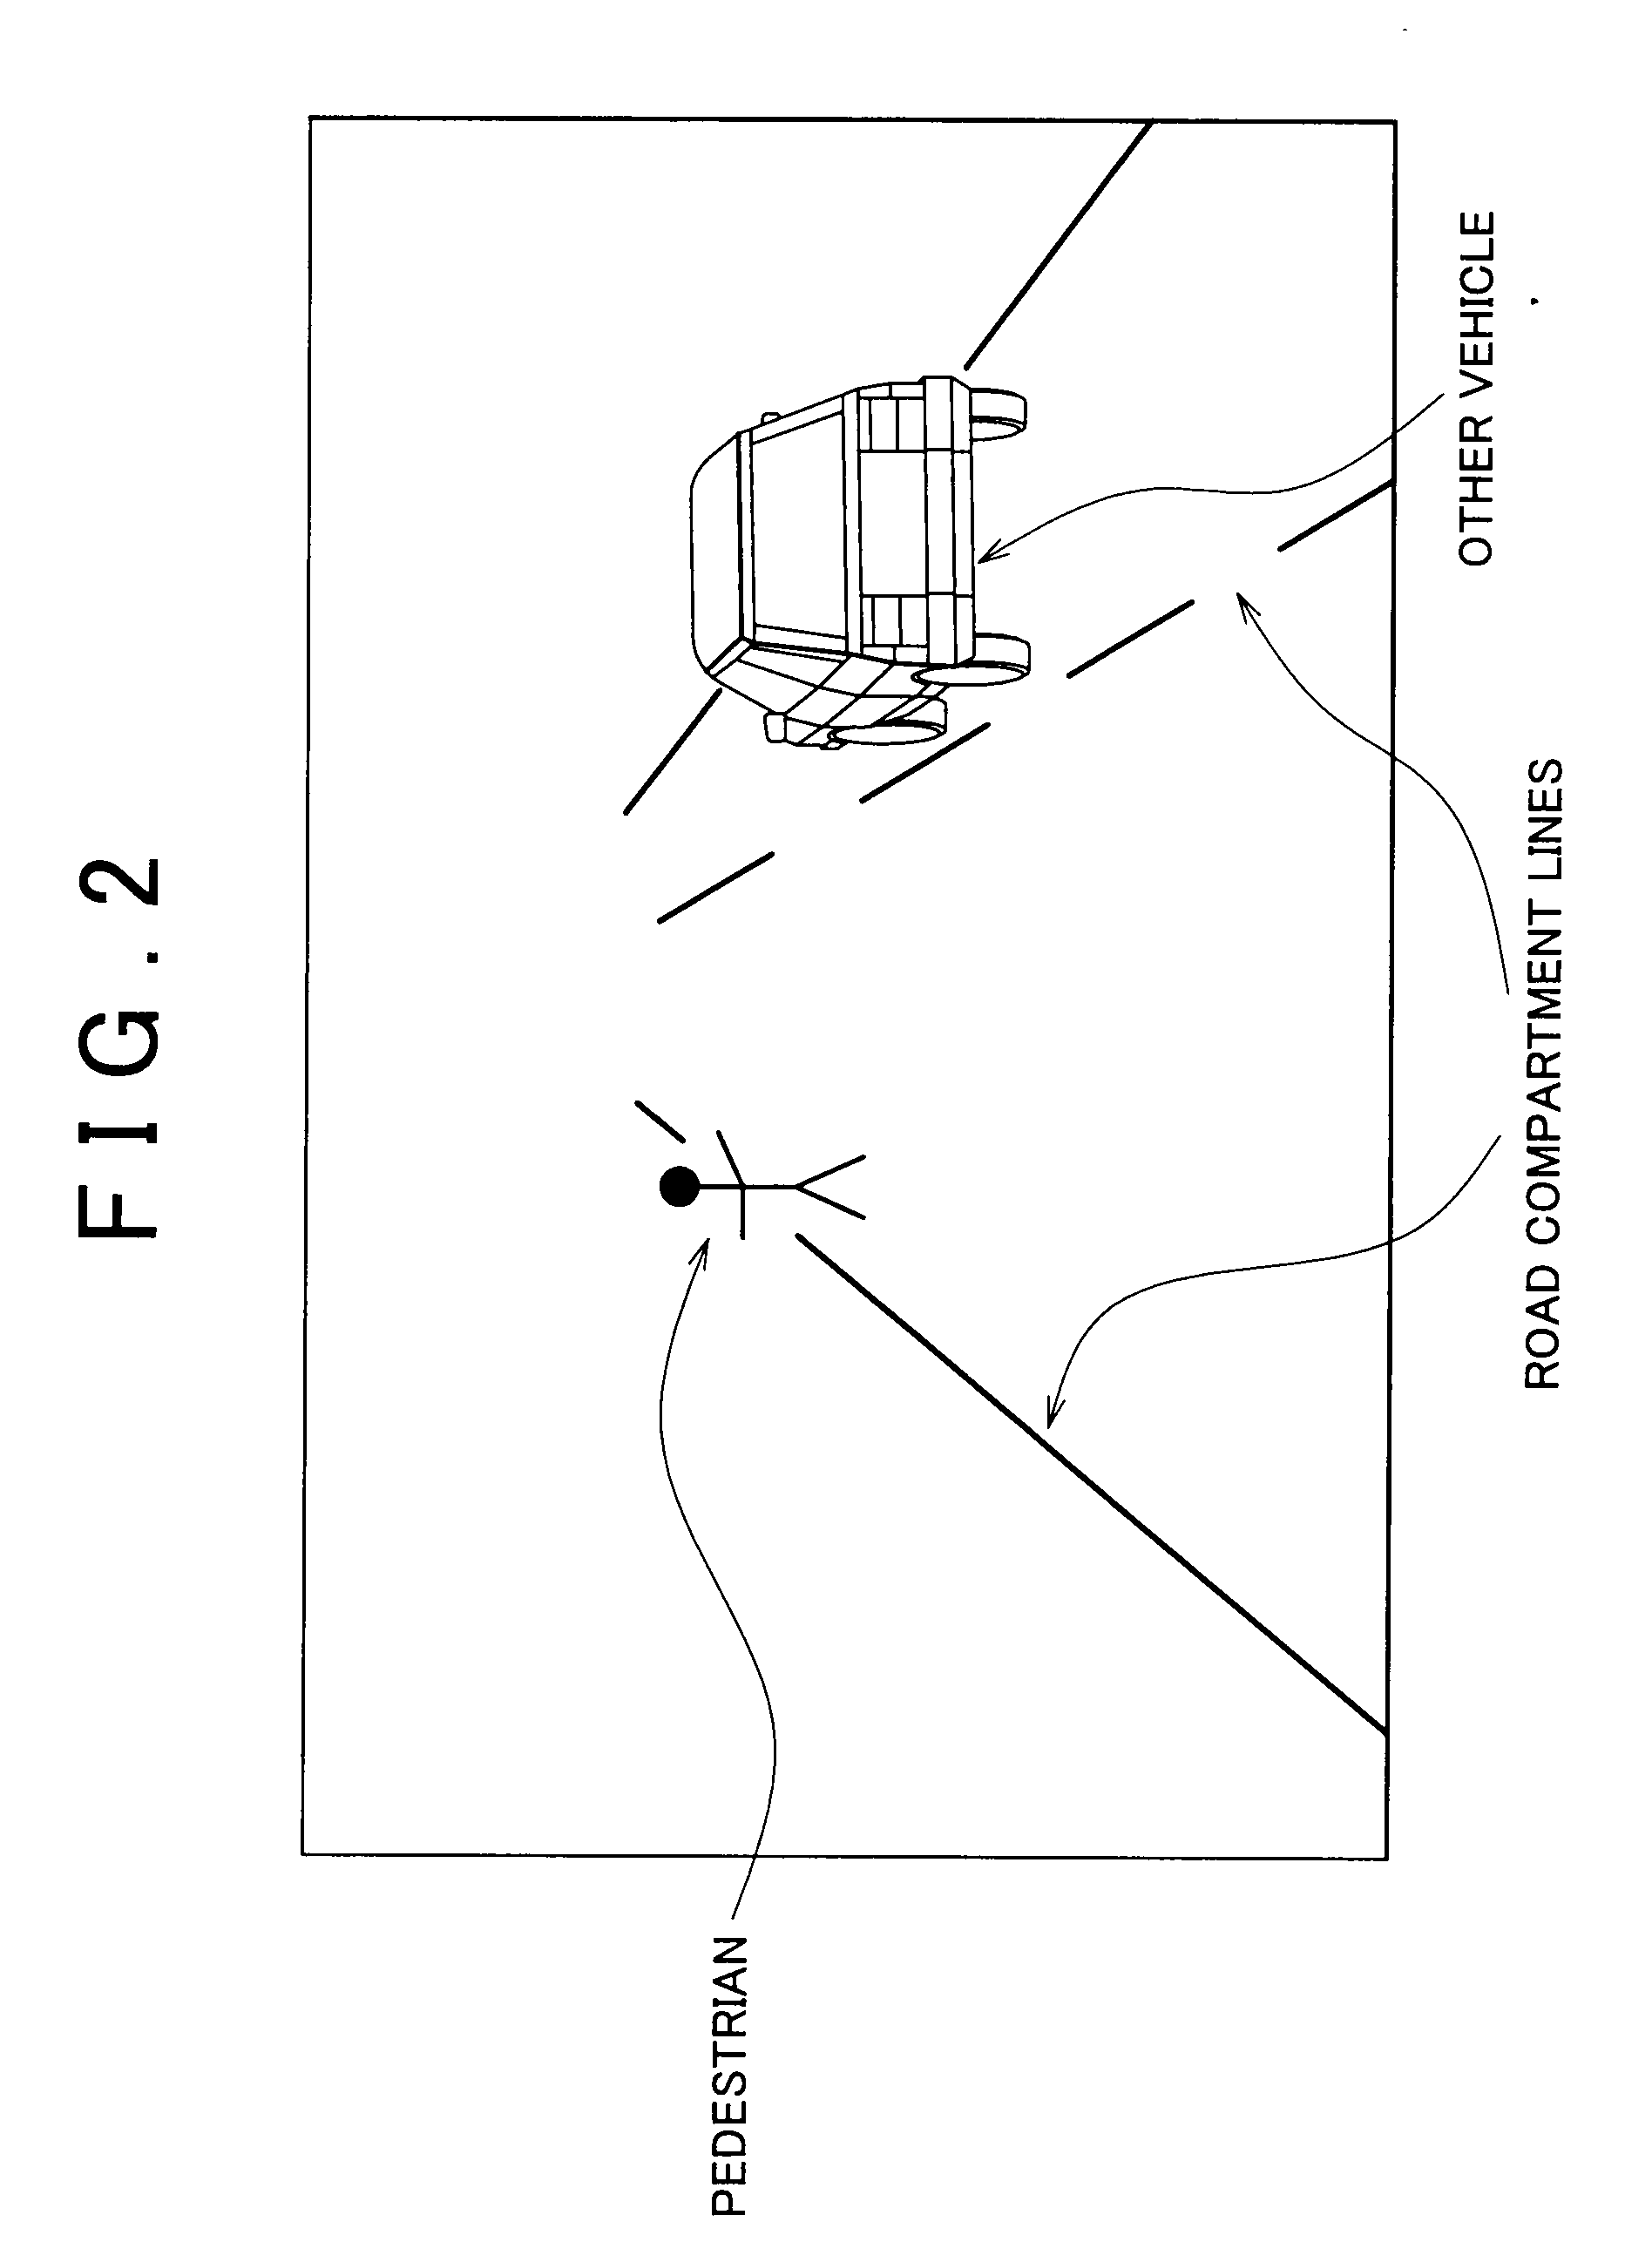 Vehicle imaging system and vehicle control apparatus